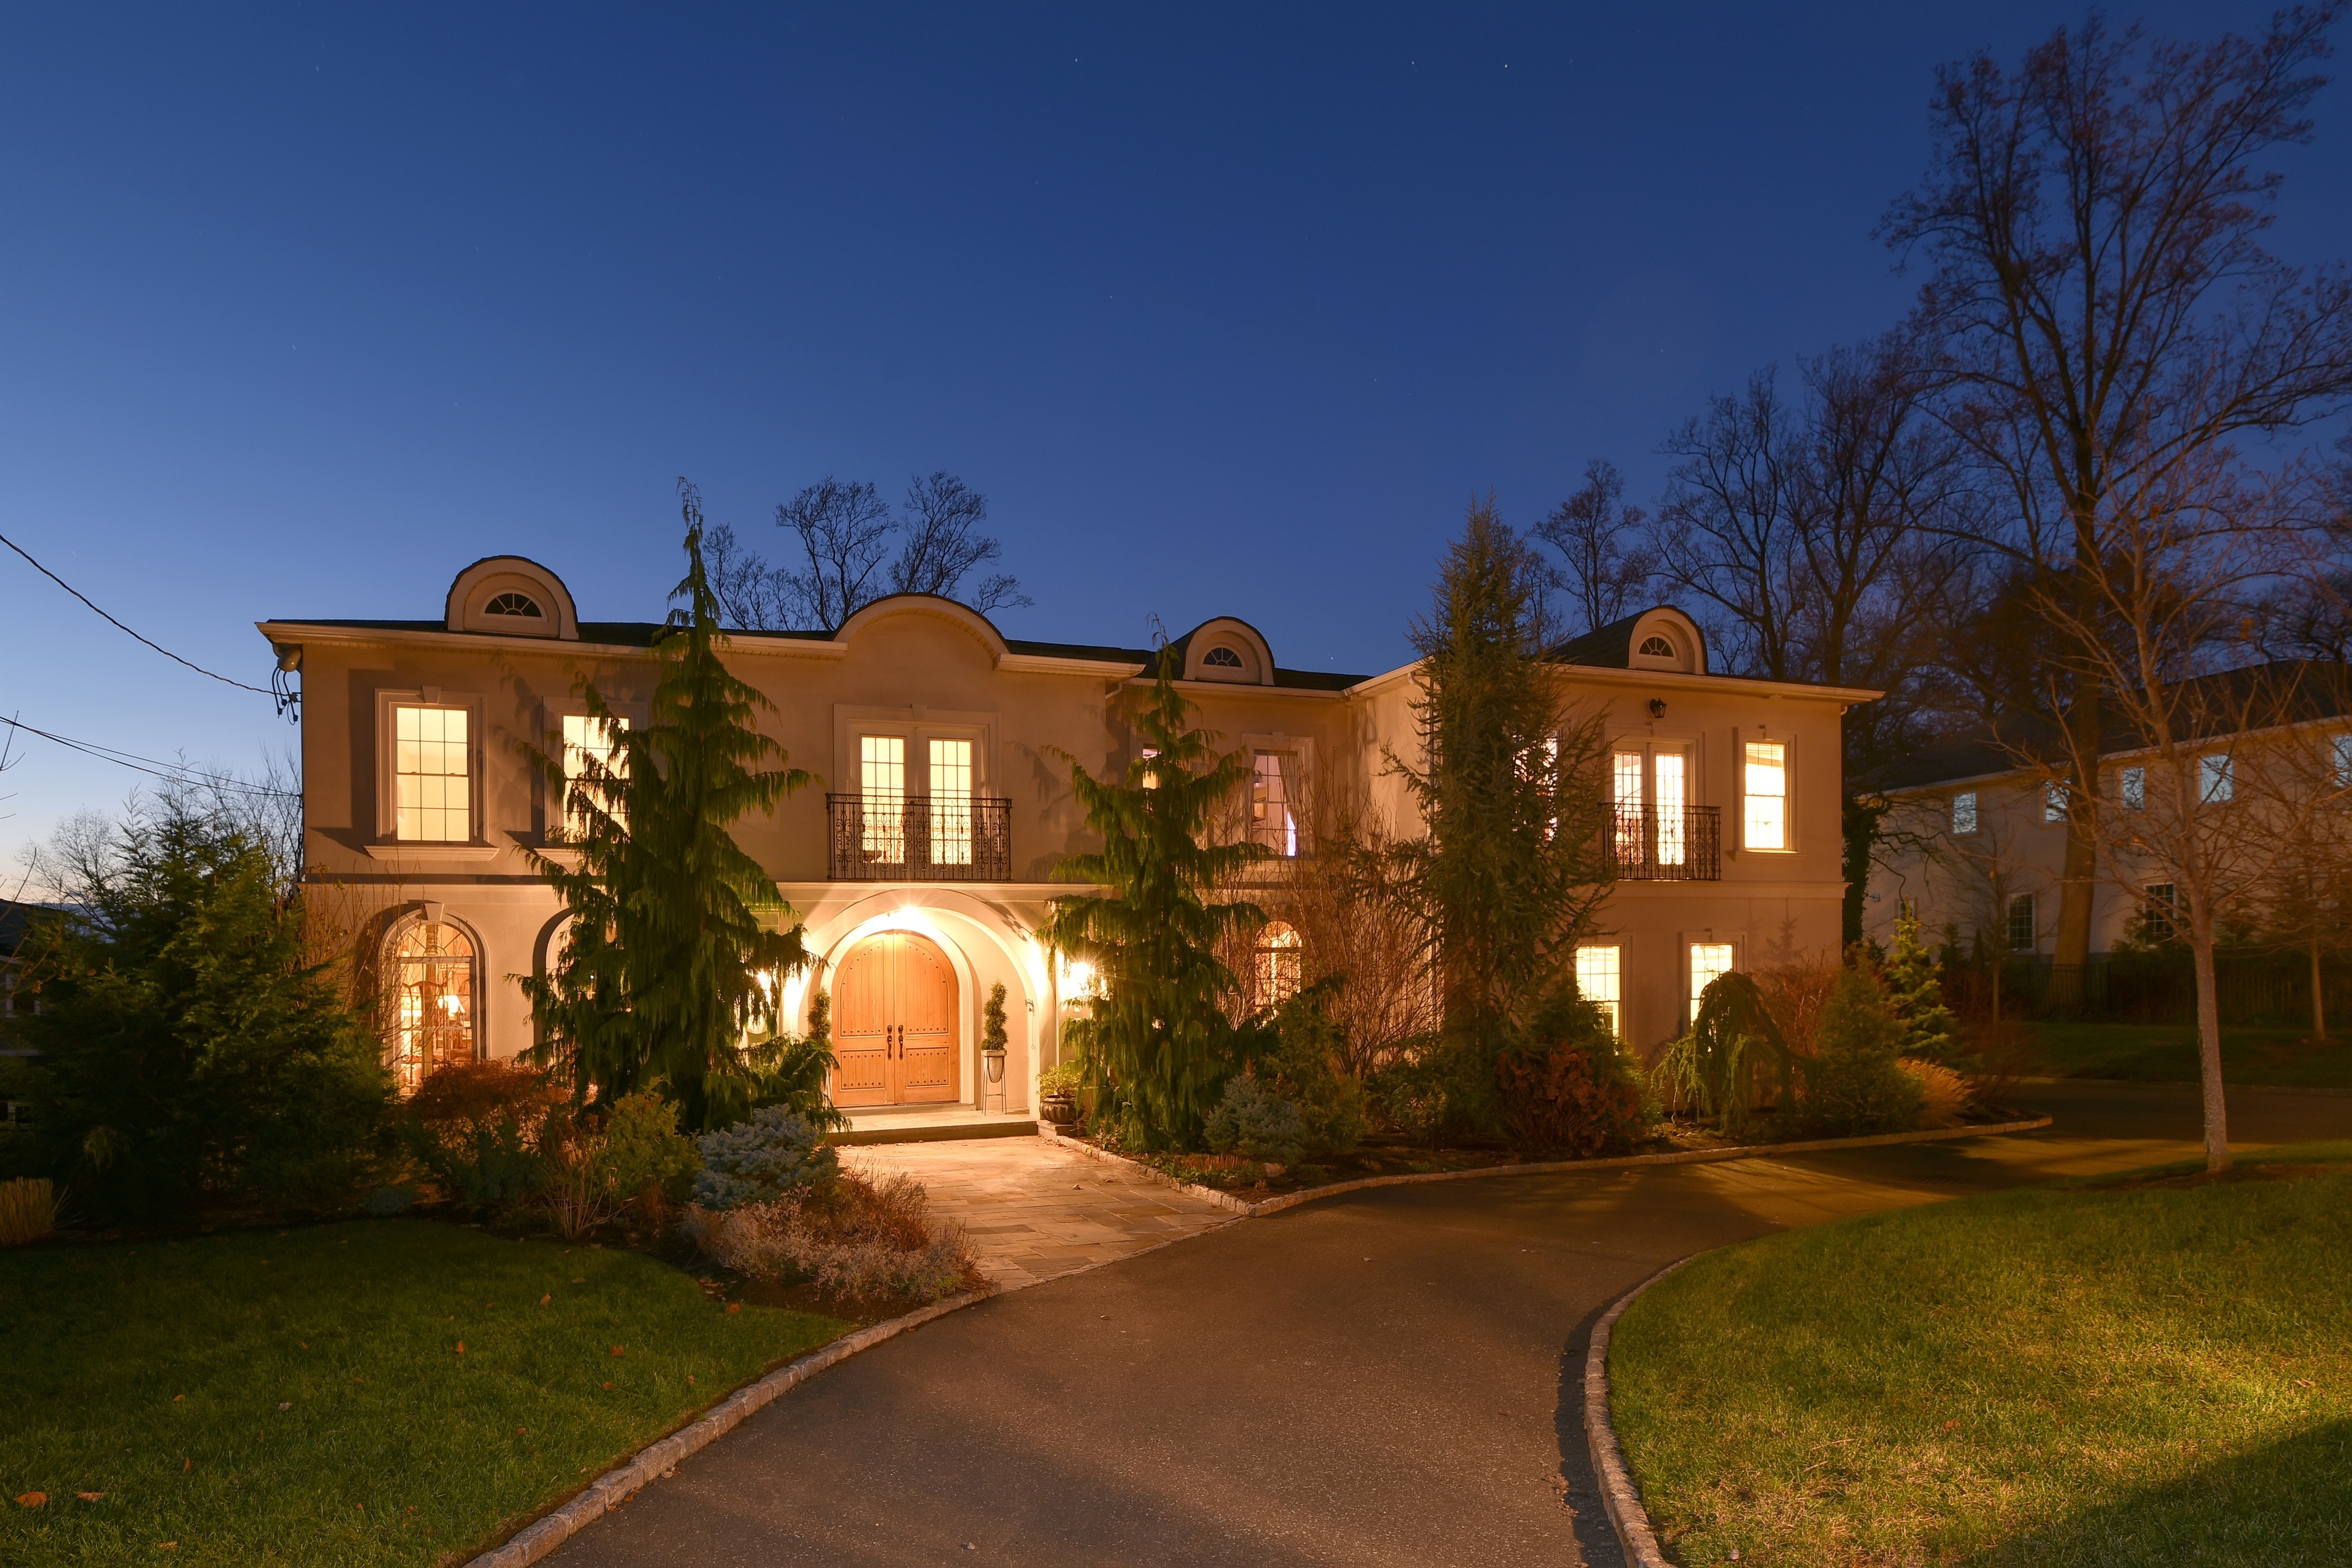 213 engle st tenafly nj 07670 front house night view 2